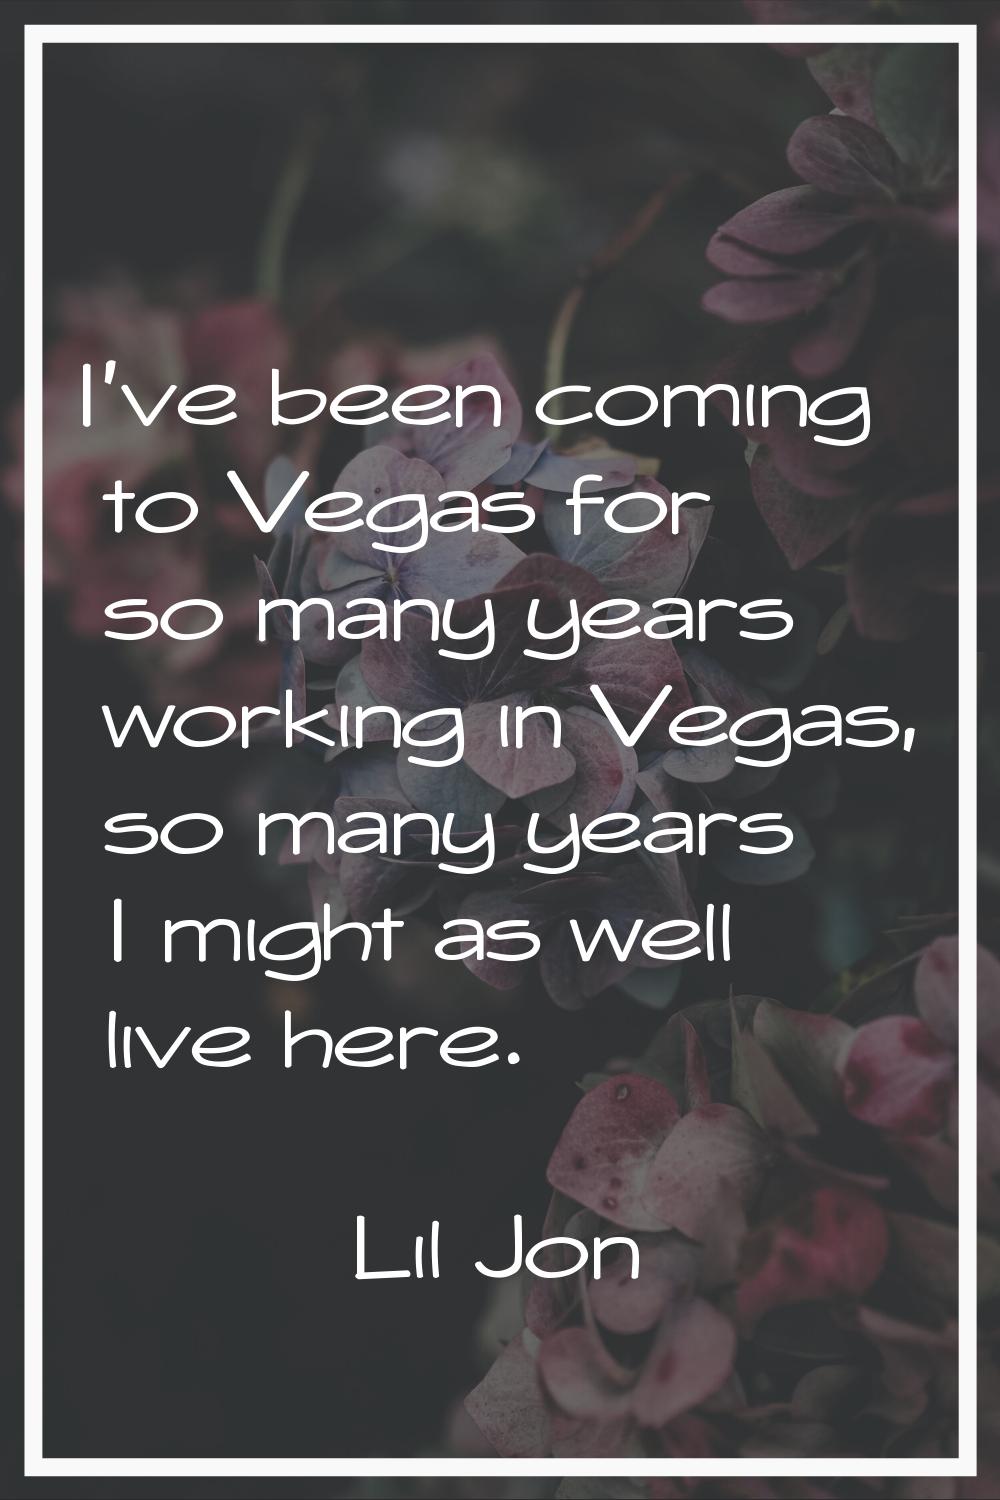 I've been coming to Vegas for so many years working in Vegas, so many years I might as well live he